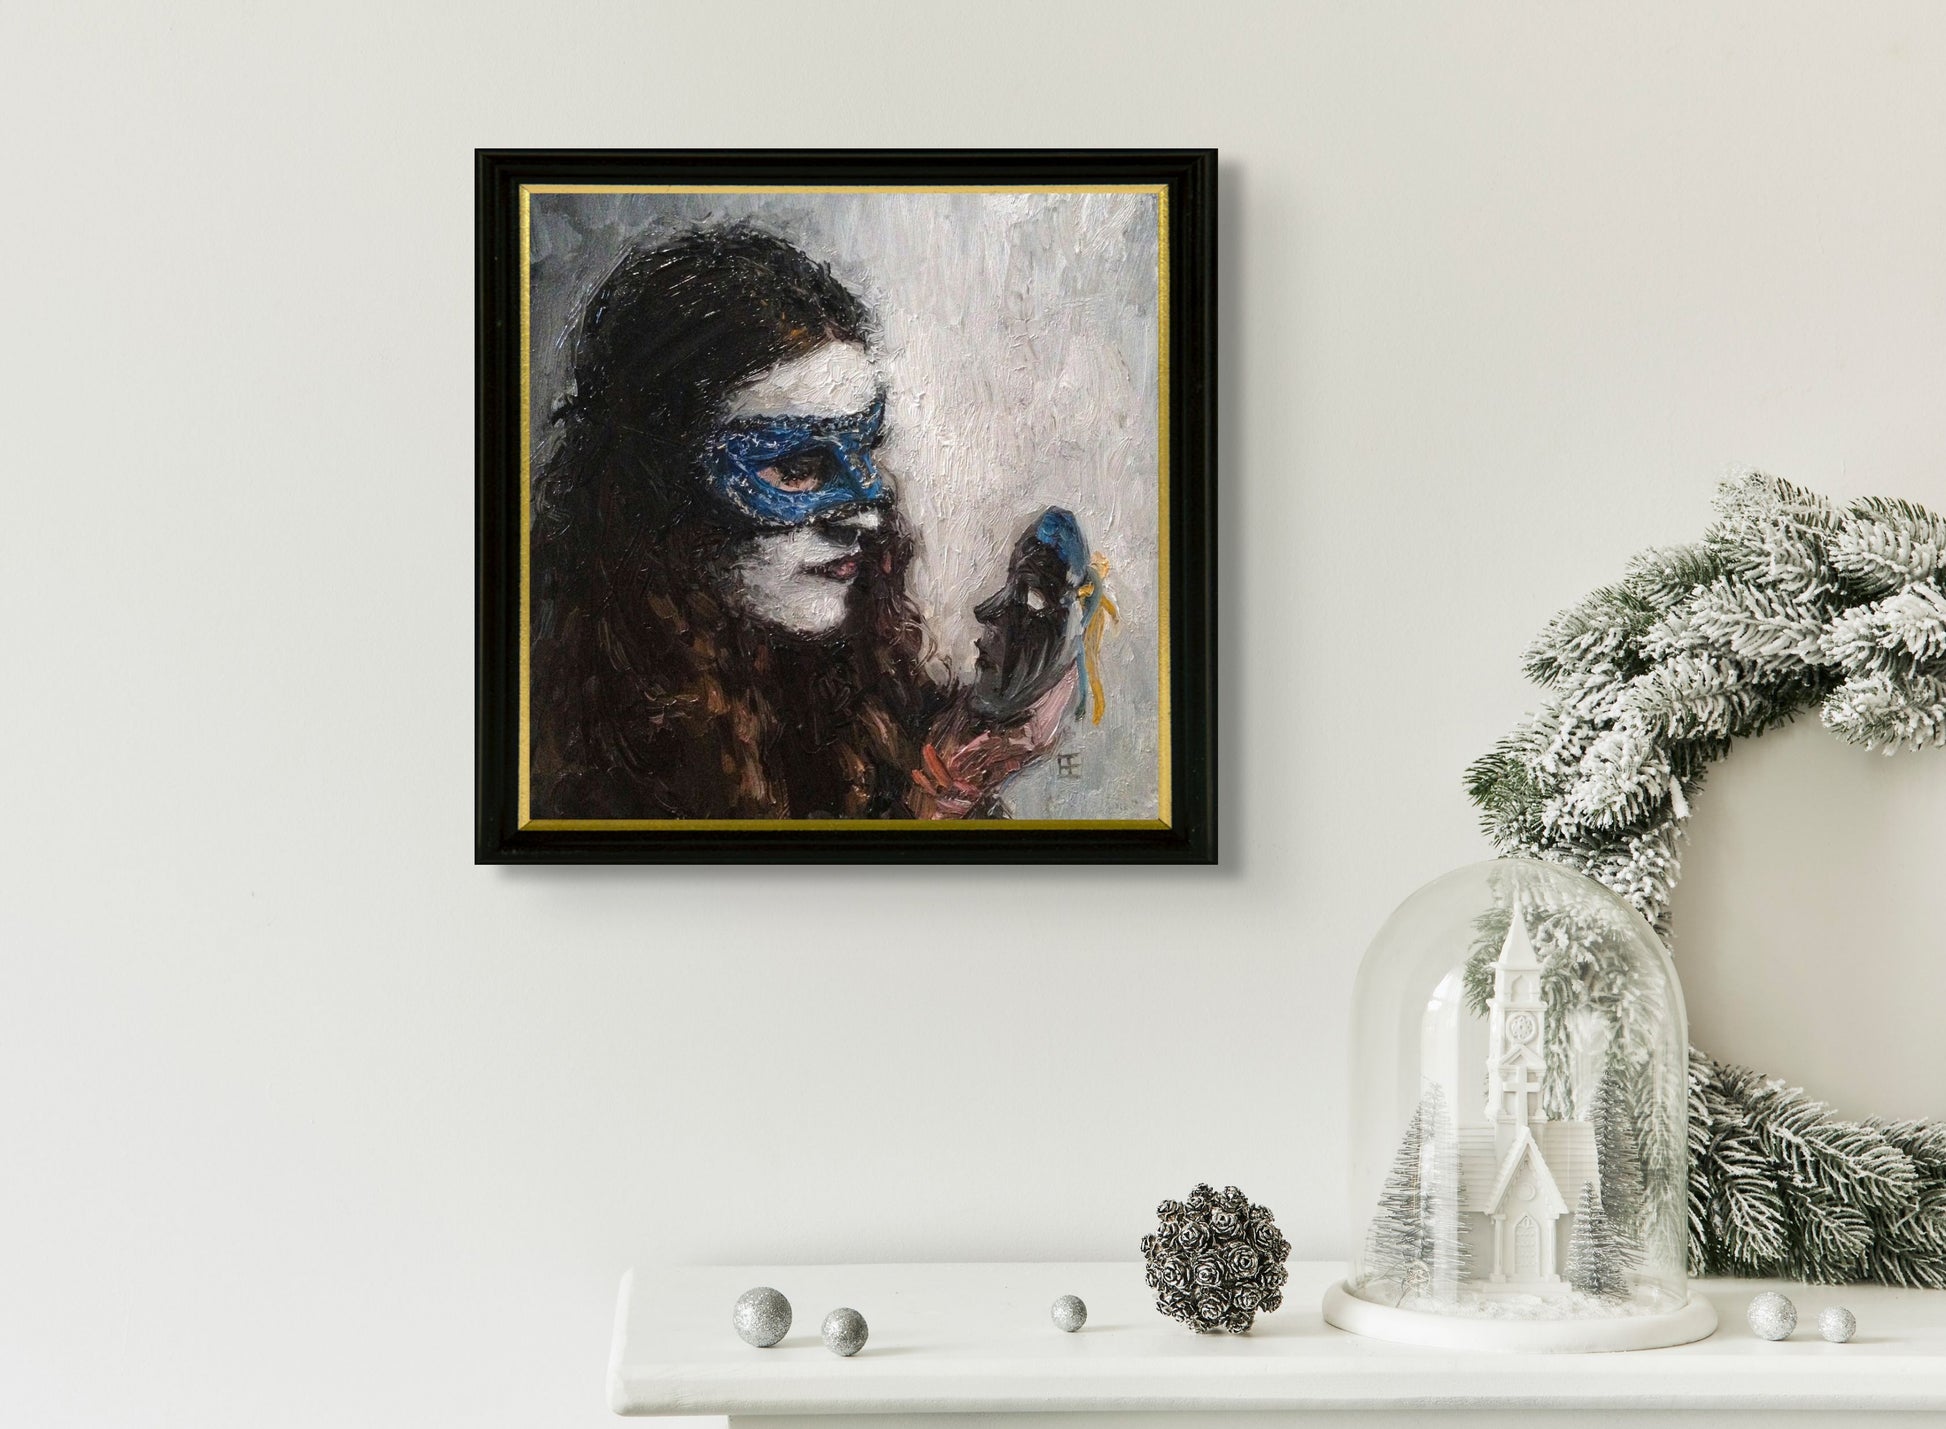 Masked woman with white make up wearing blue mask holds up a new black mask to consider; artist E. E. Jacks; 8"Wx8"H framed and in situ